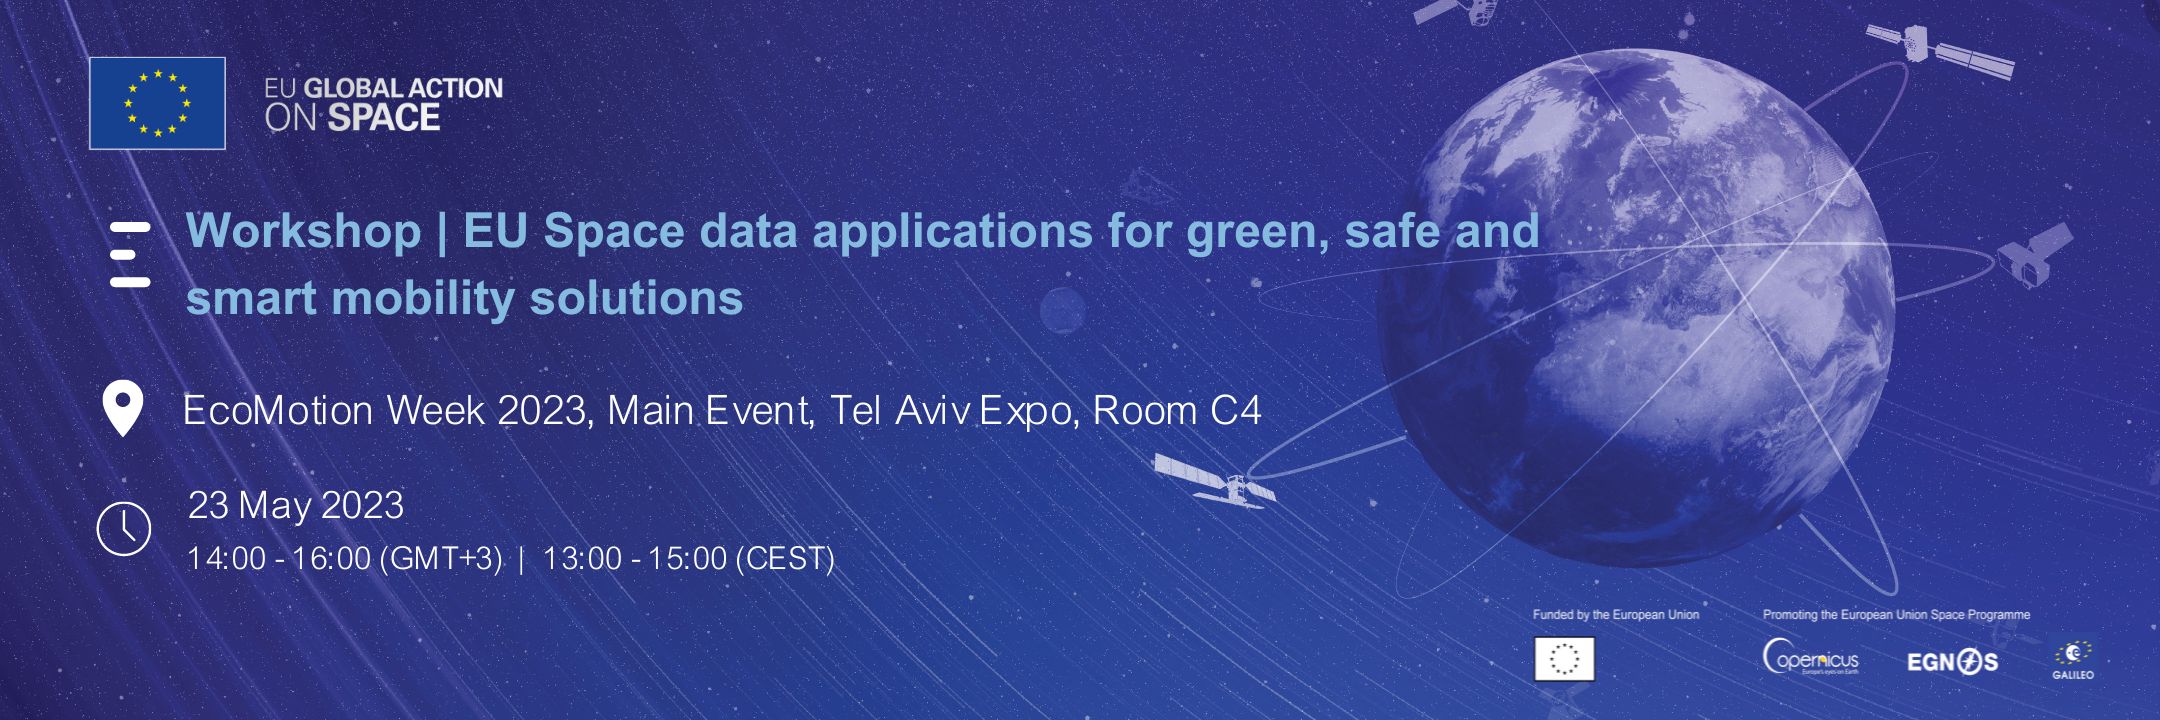 EU Space data applications for green, safe and smart mobility solutions